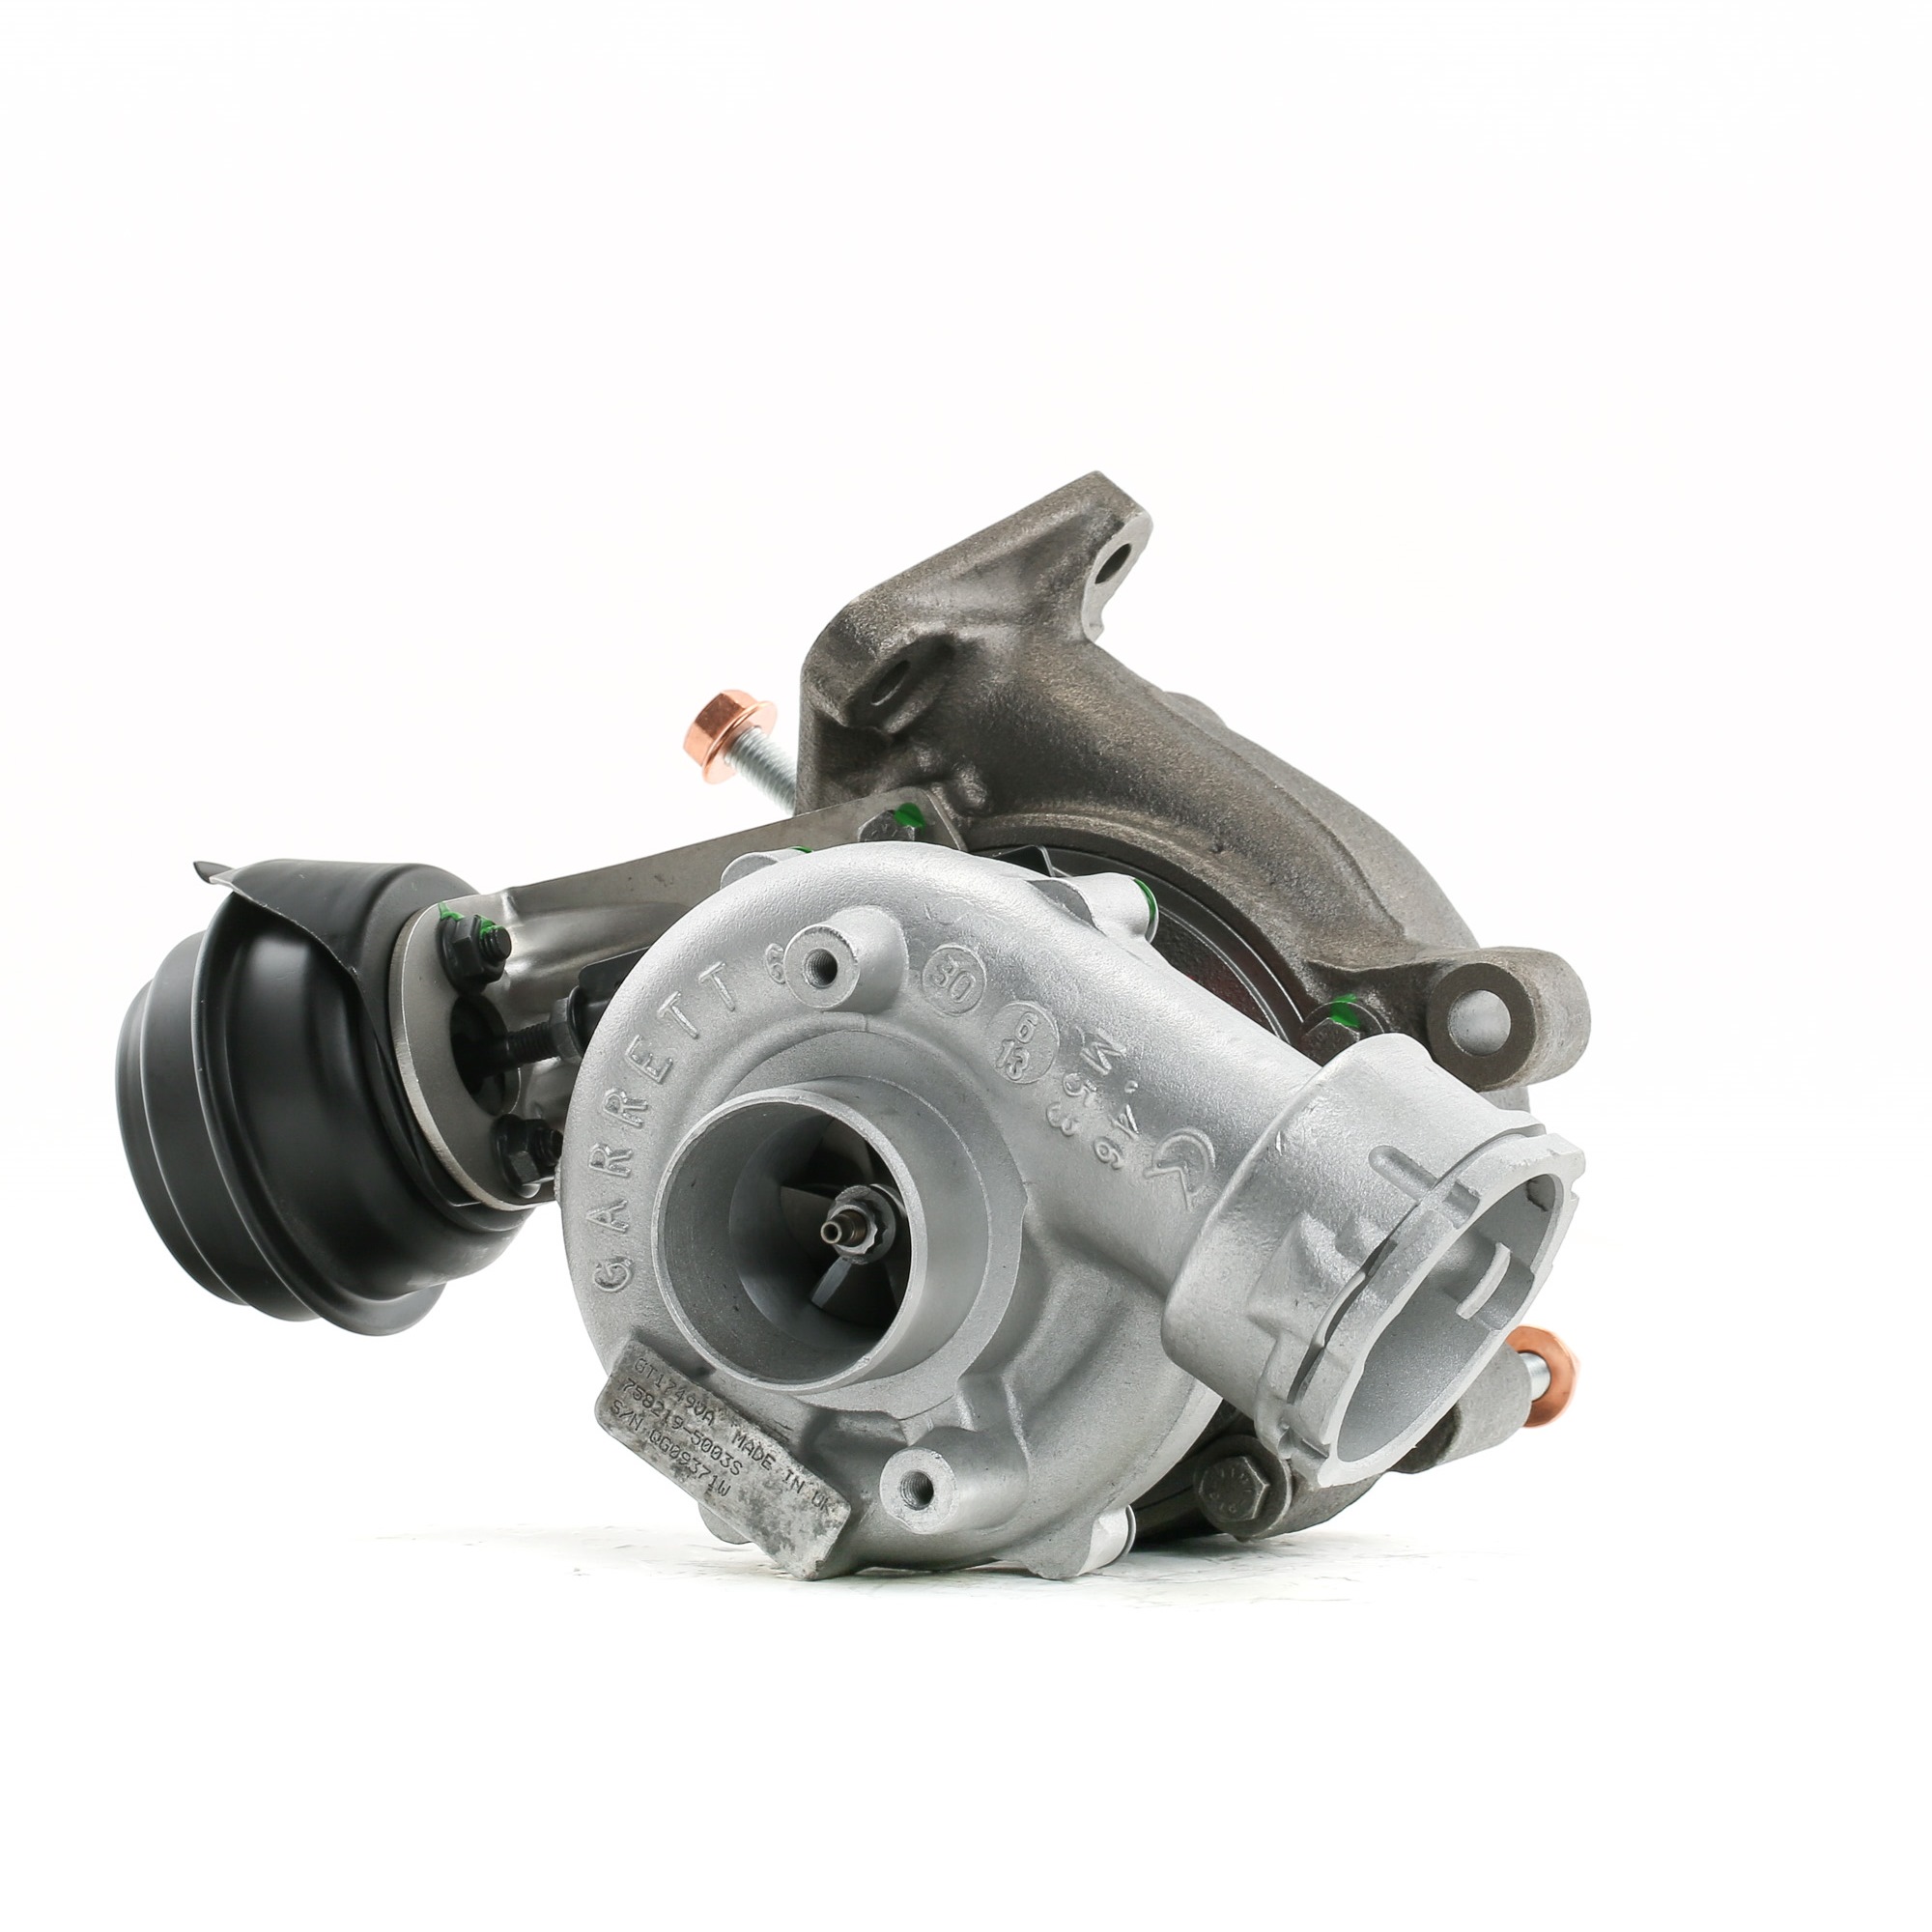 RIDEX REMAN 2234C0090R Turbocharger Exhaust Turbocharger, Euro 4 (D4), Pneumatic, without attachment material